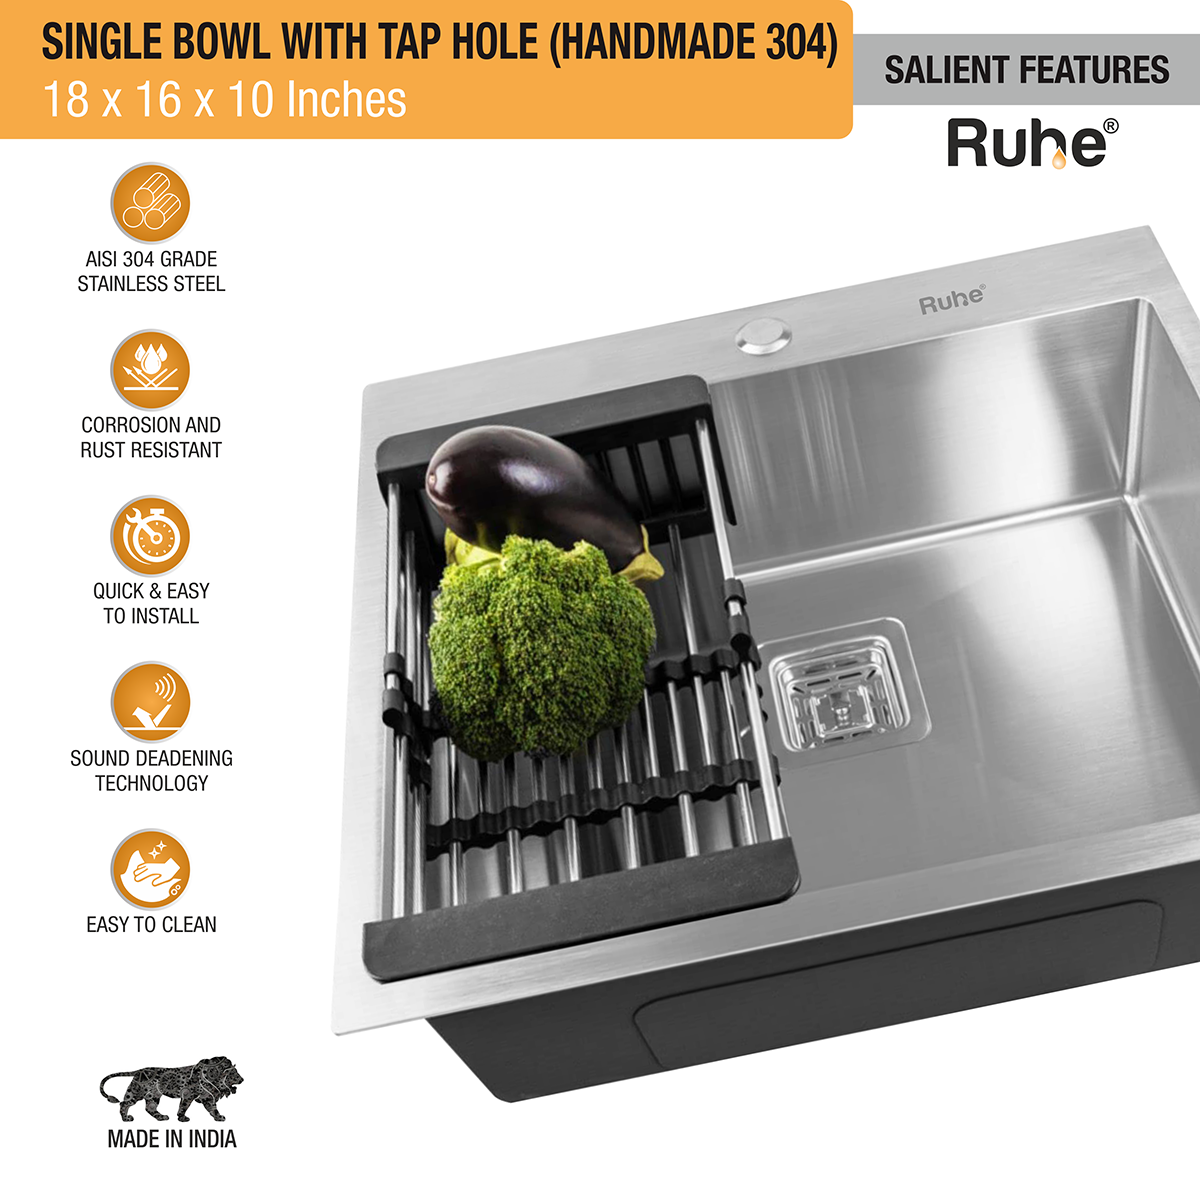 Handmade Single Bowl 304-Grade Kitchen Sink (18 x 16 x 10 Inches) with Tap Hole features and benefits